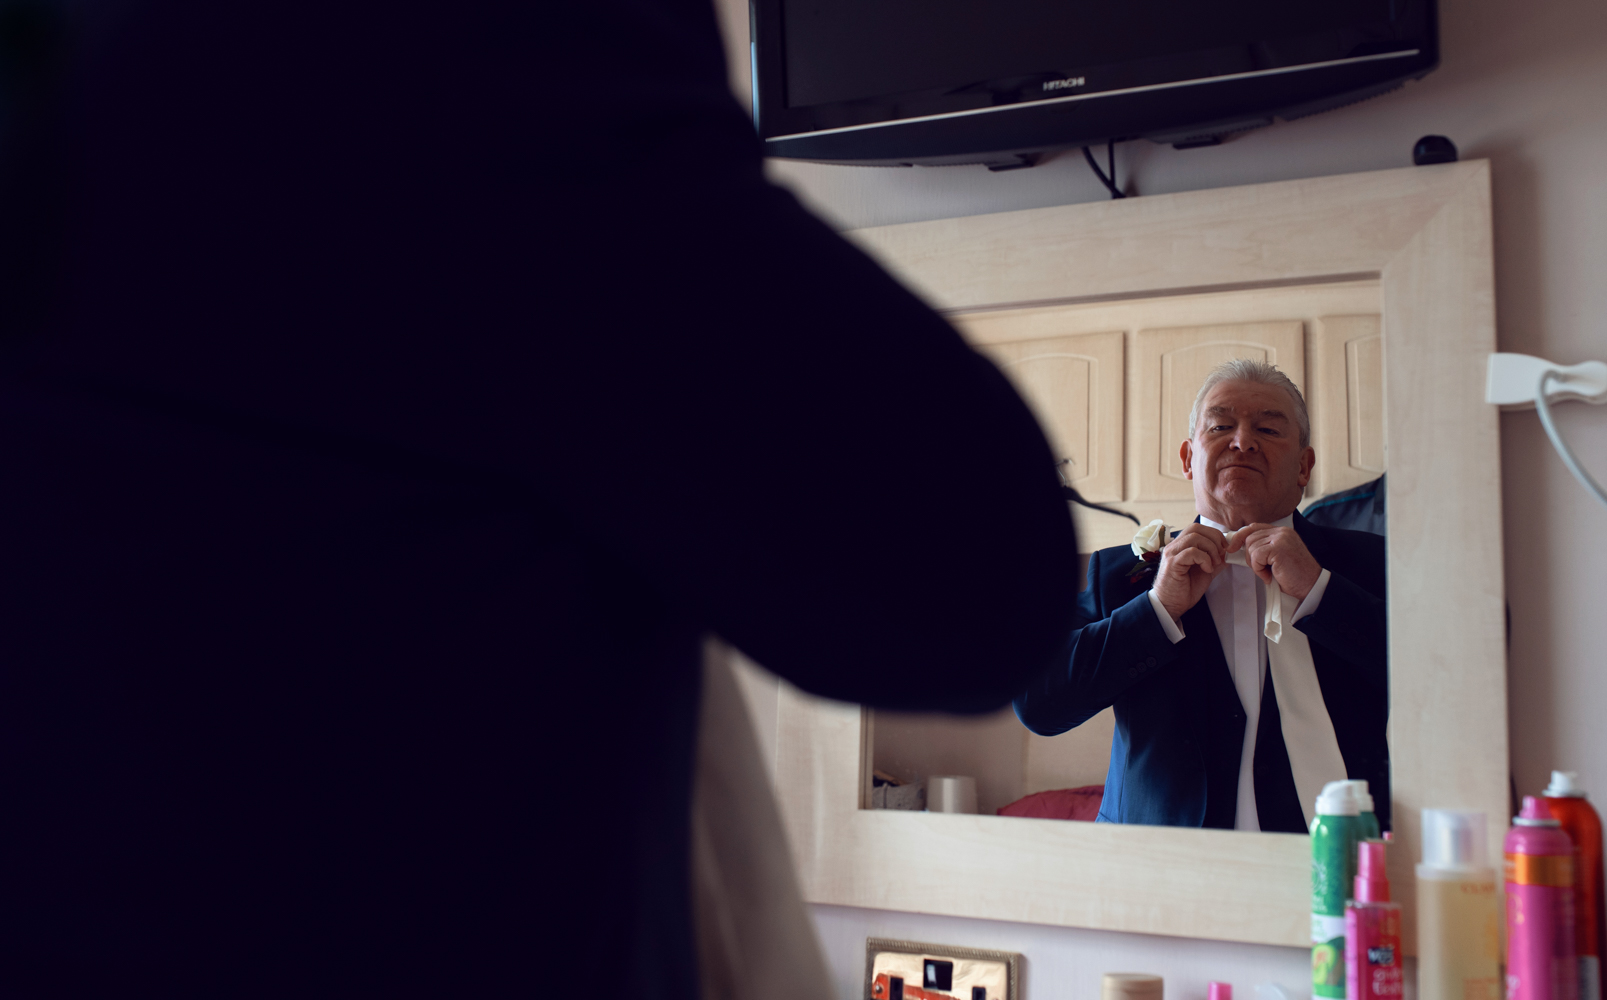 Image if the brides father adjusting his tie in the mirror